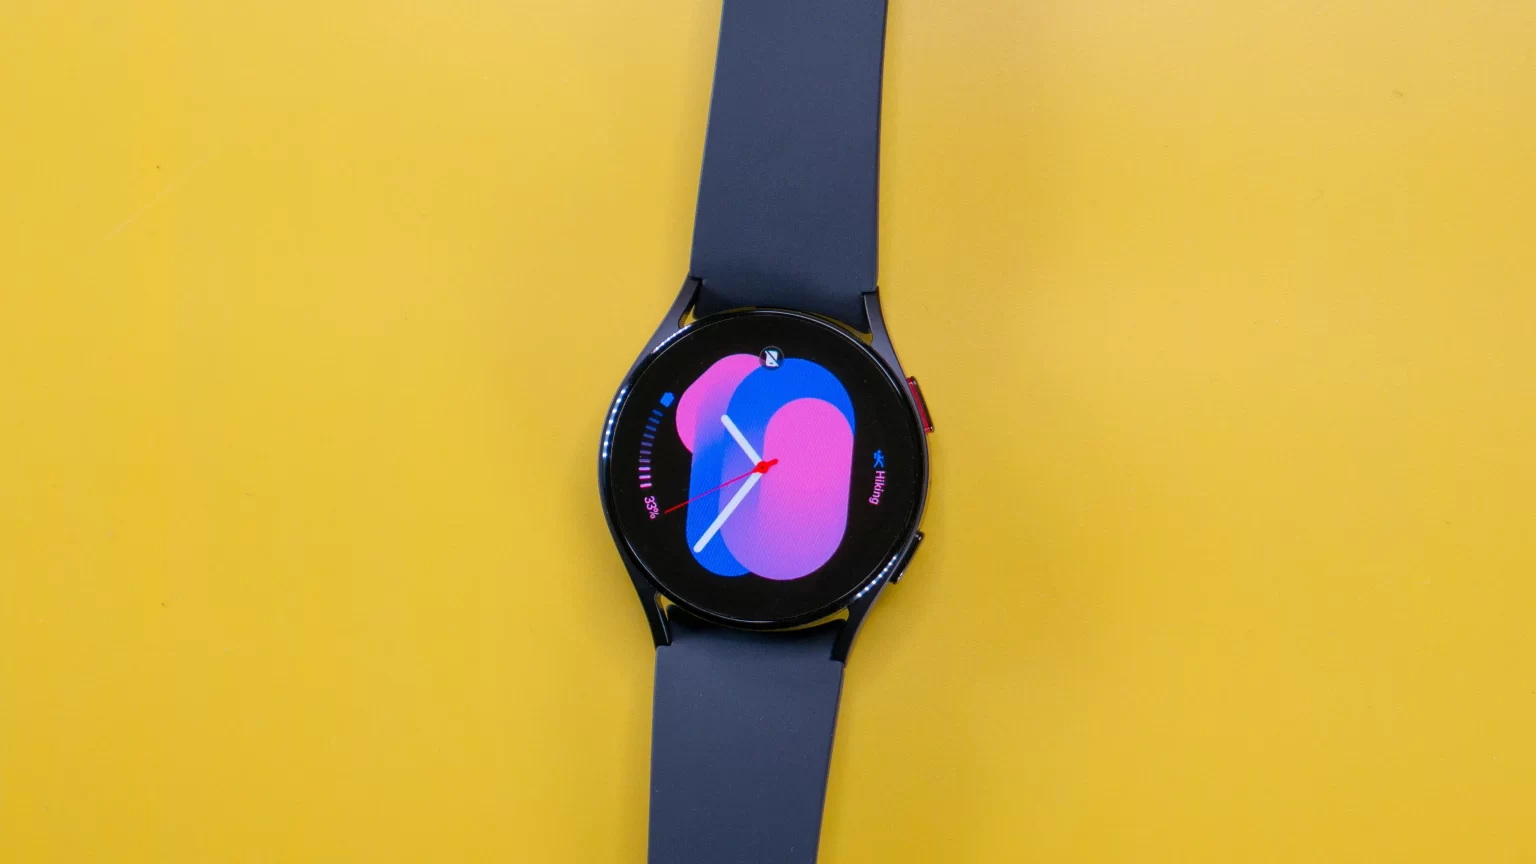 galaxywatch5 hero 1536x864 - How to Backup and Restore Data on Your Samsung Galaxy Watch